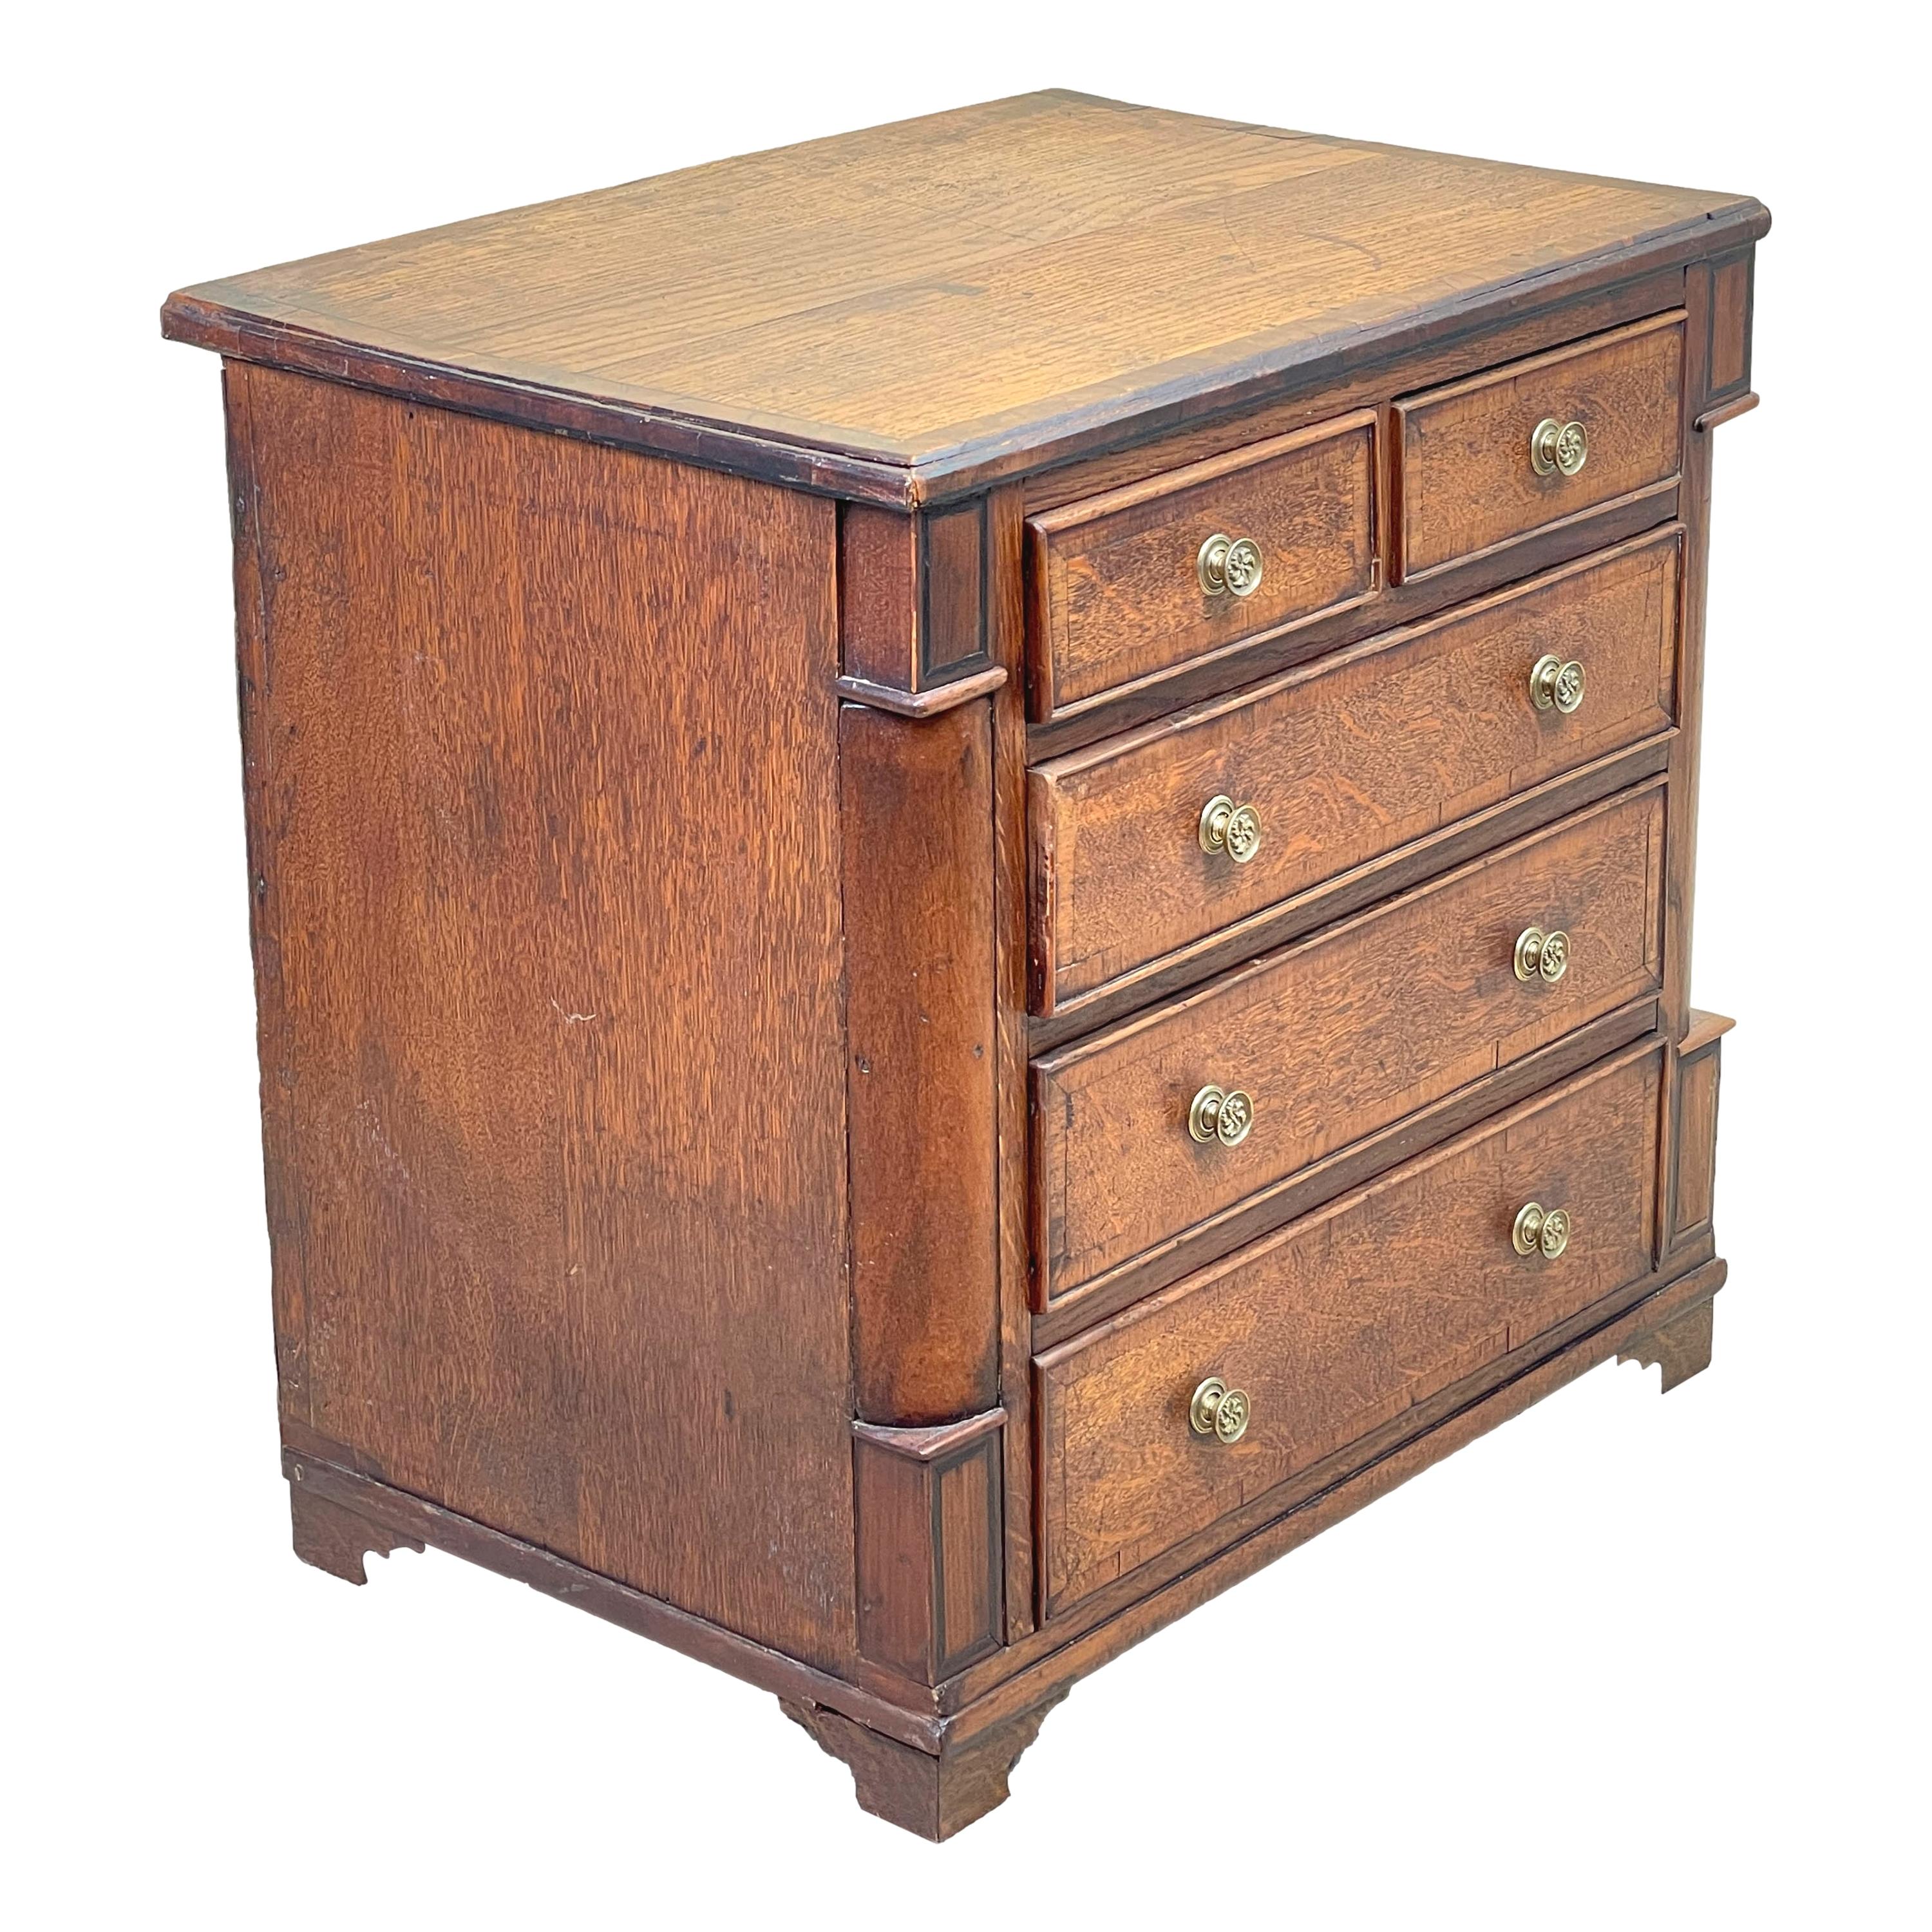 A very attractive George III period oak childs chest having well
Figured and crossbanded top above two short and three long
Drawers flanked by curved corners raised on replaced bracket
Feet

(This charming little childs chest is the perfect